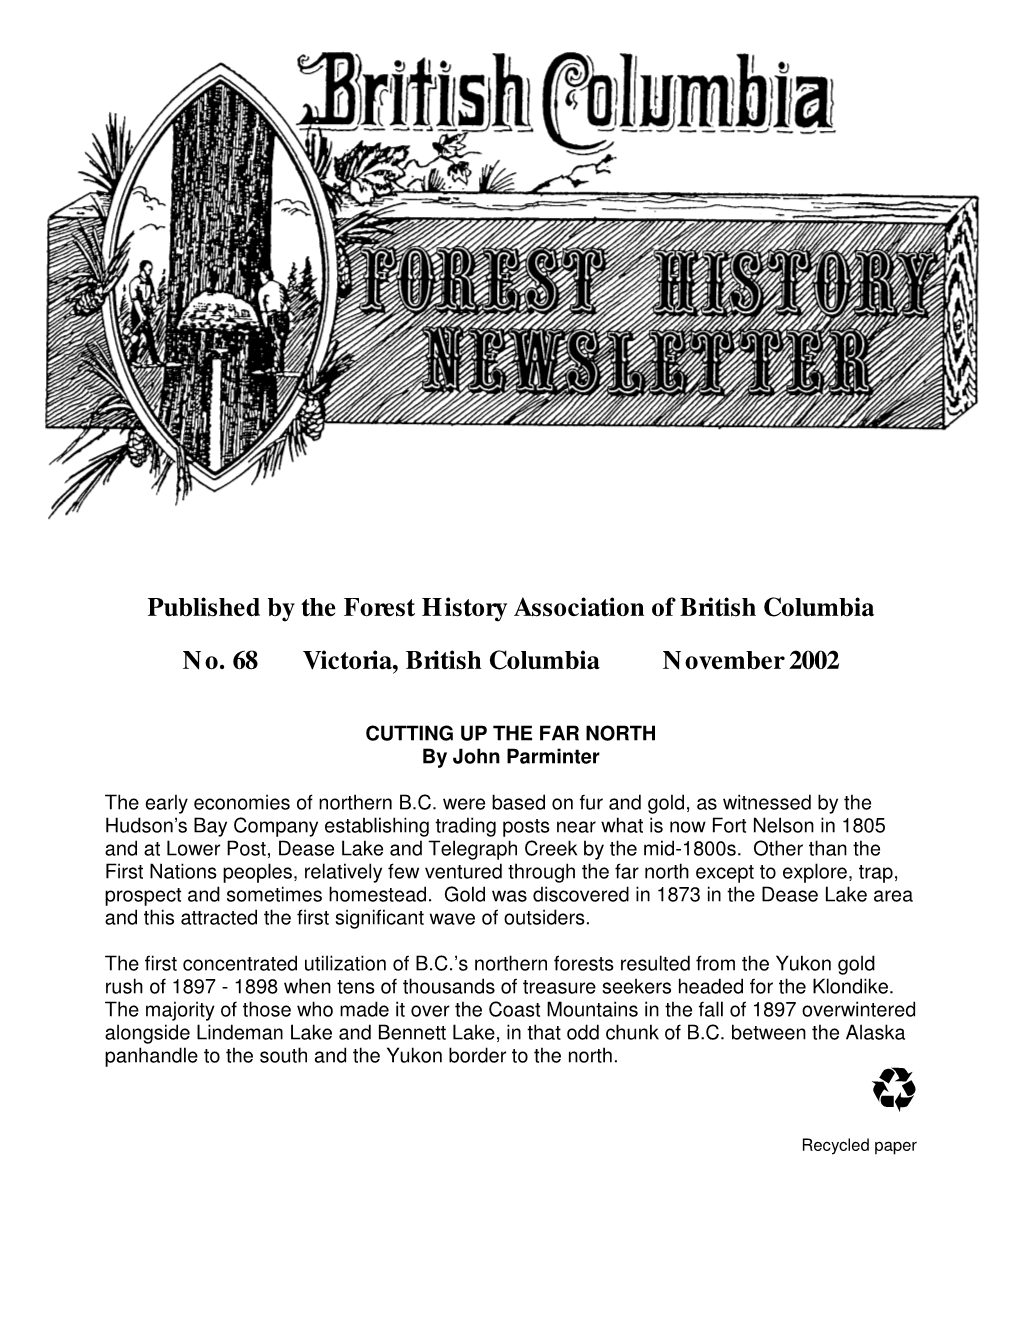 Published by the Forest History Association of British Columbia N O